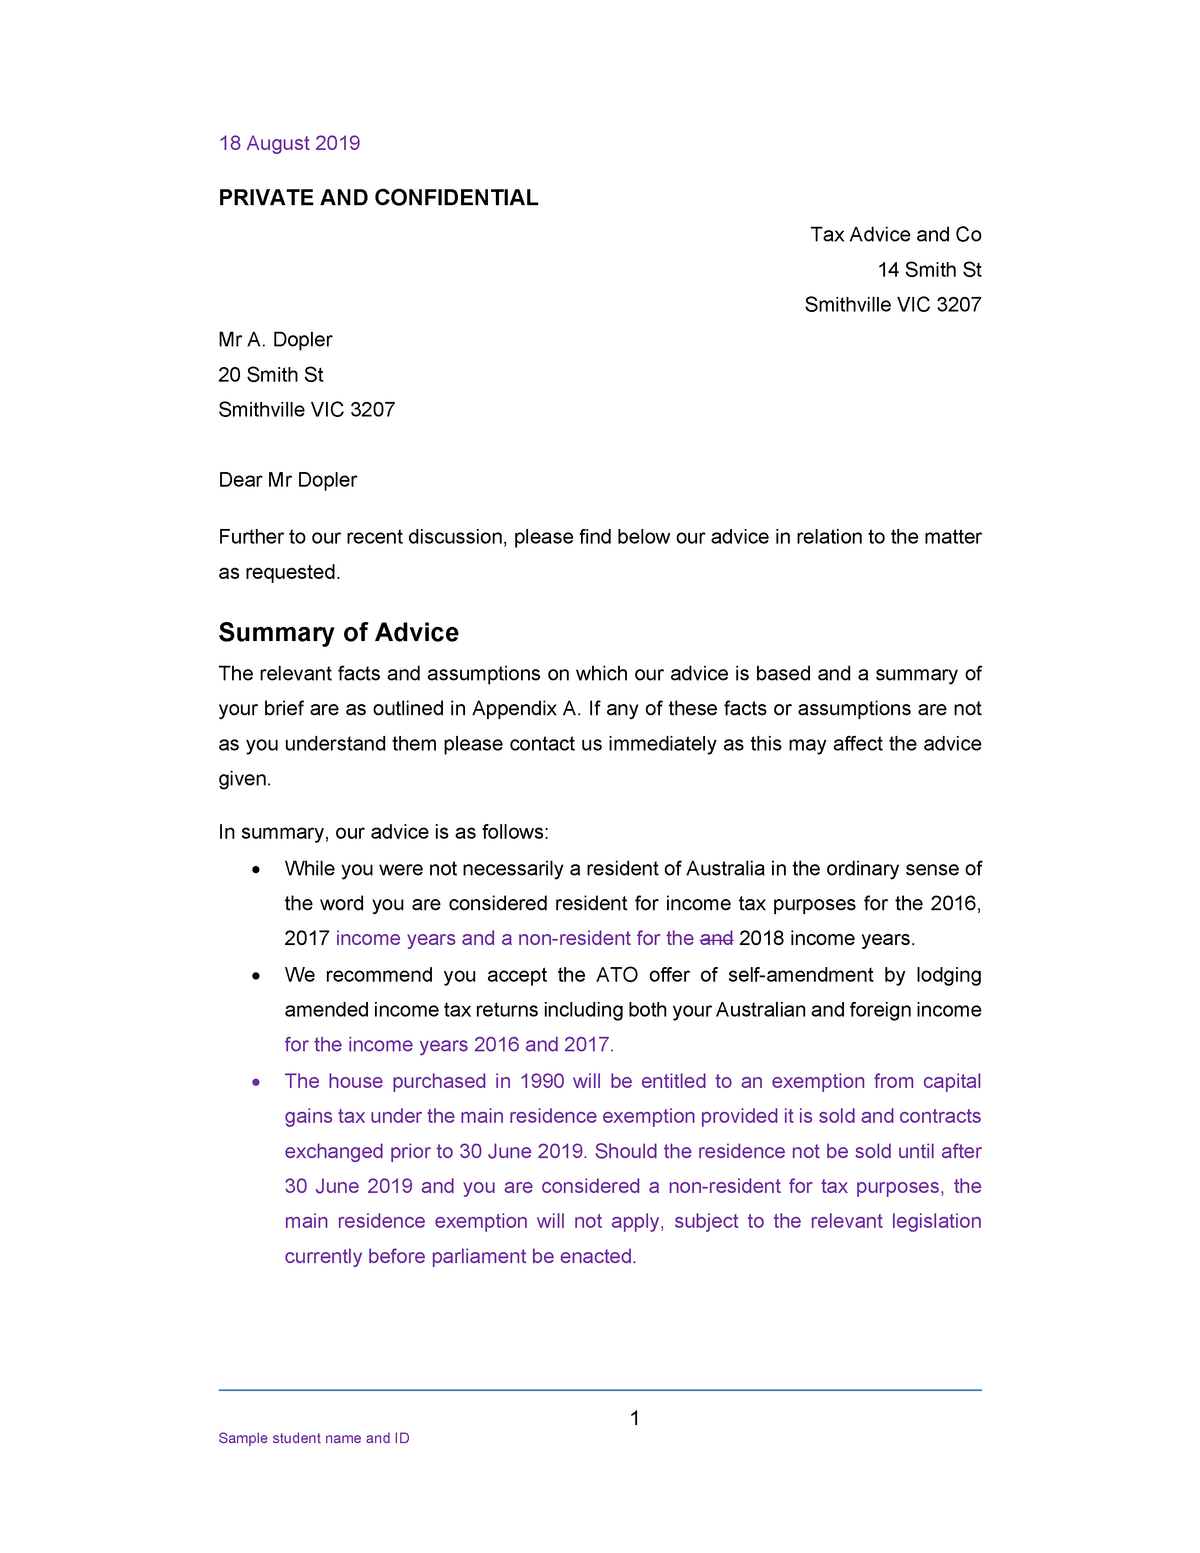 sample-letter-of-advice-1-18-august-2019-private-and-confidential-tax